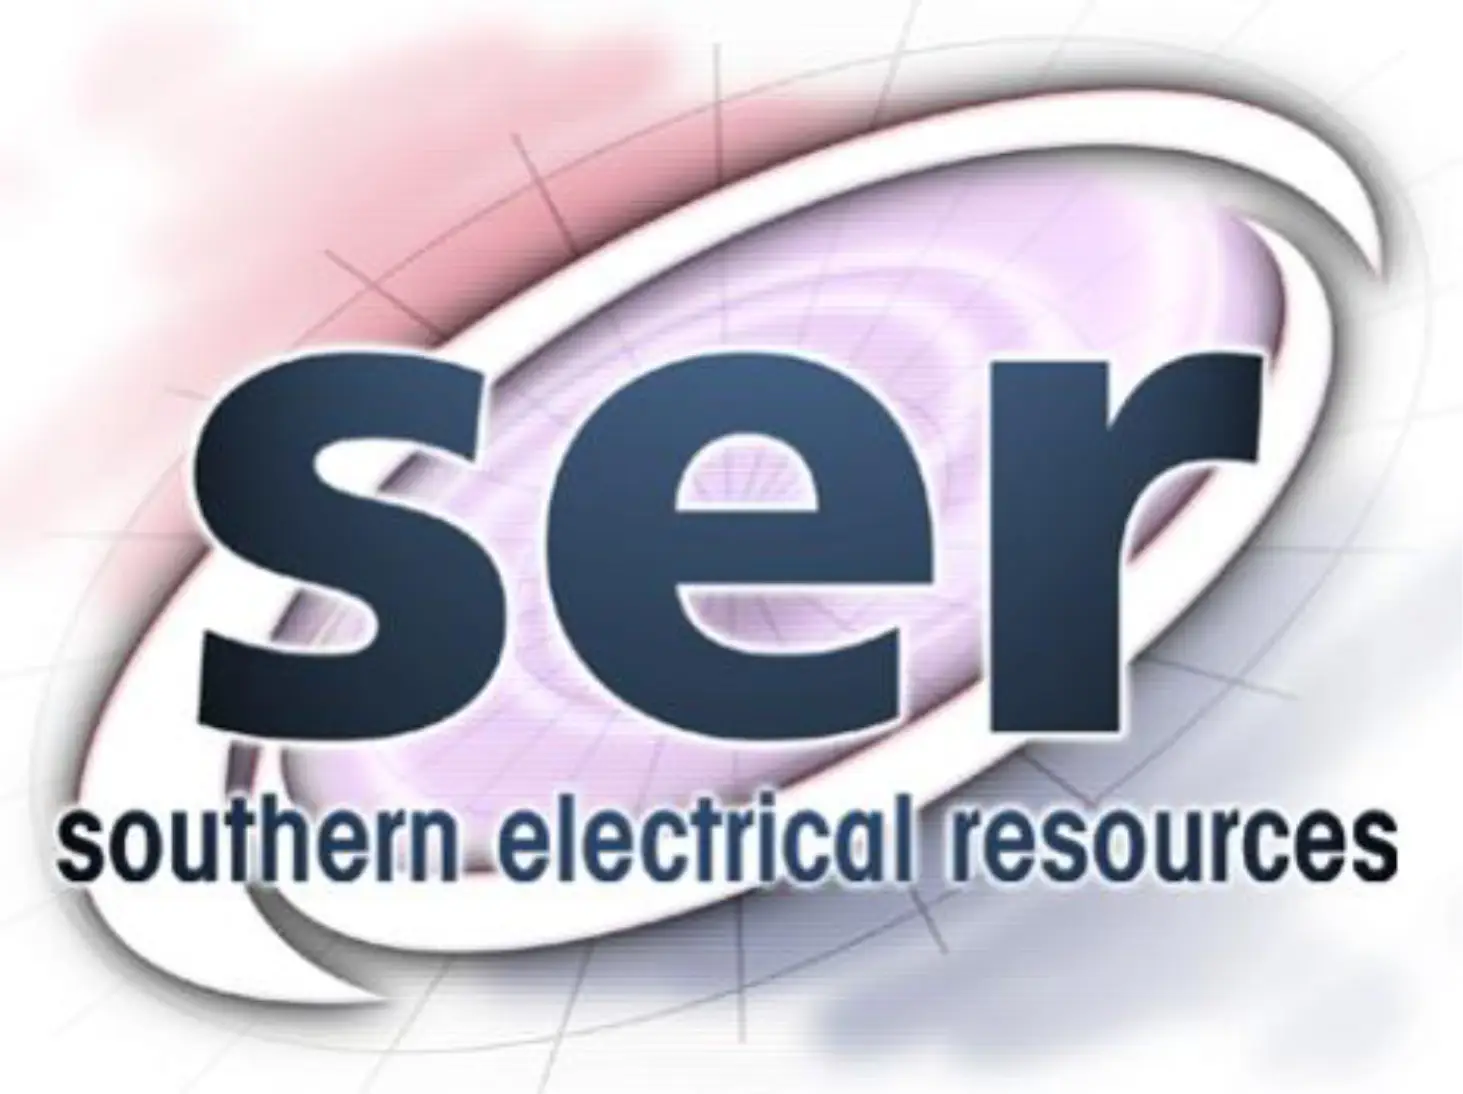 Southern Electrical Resources